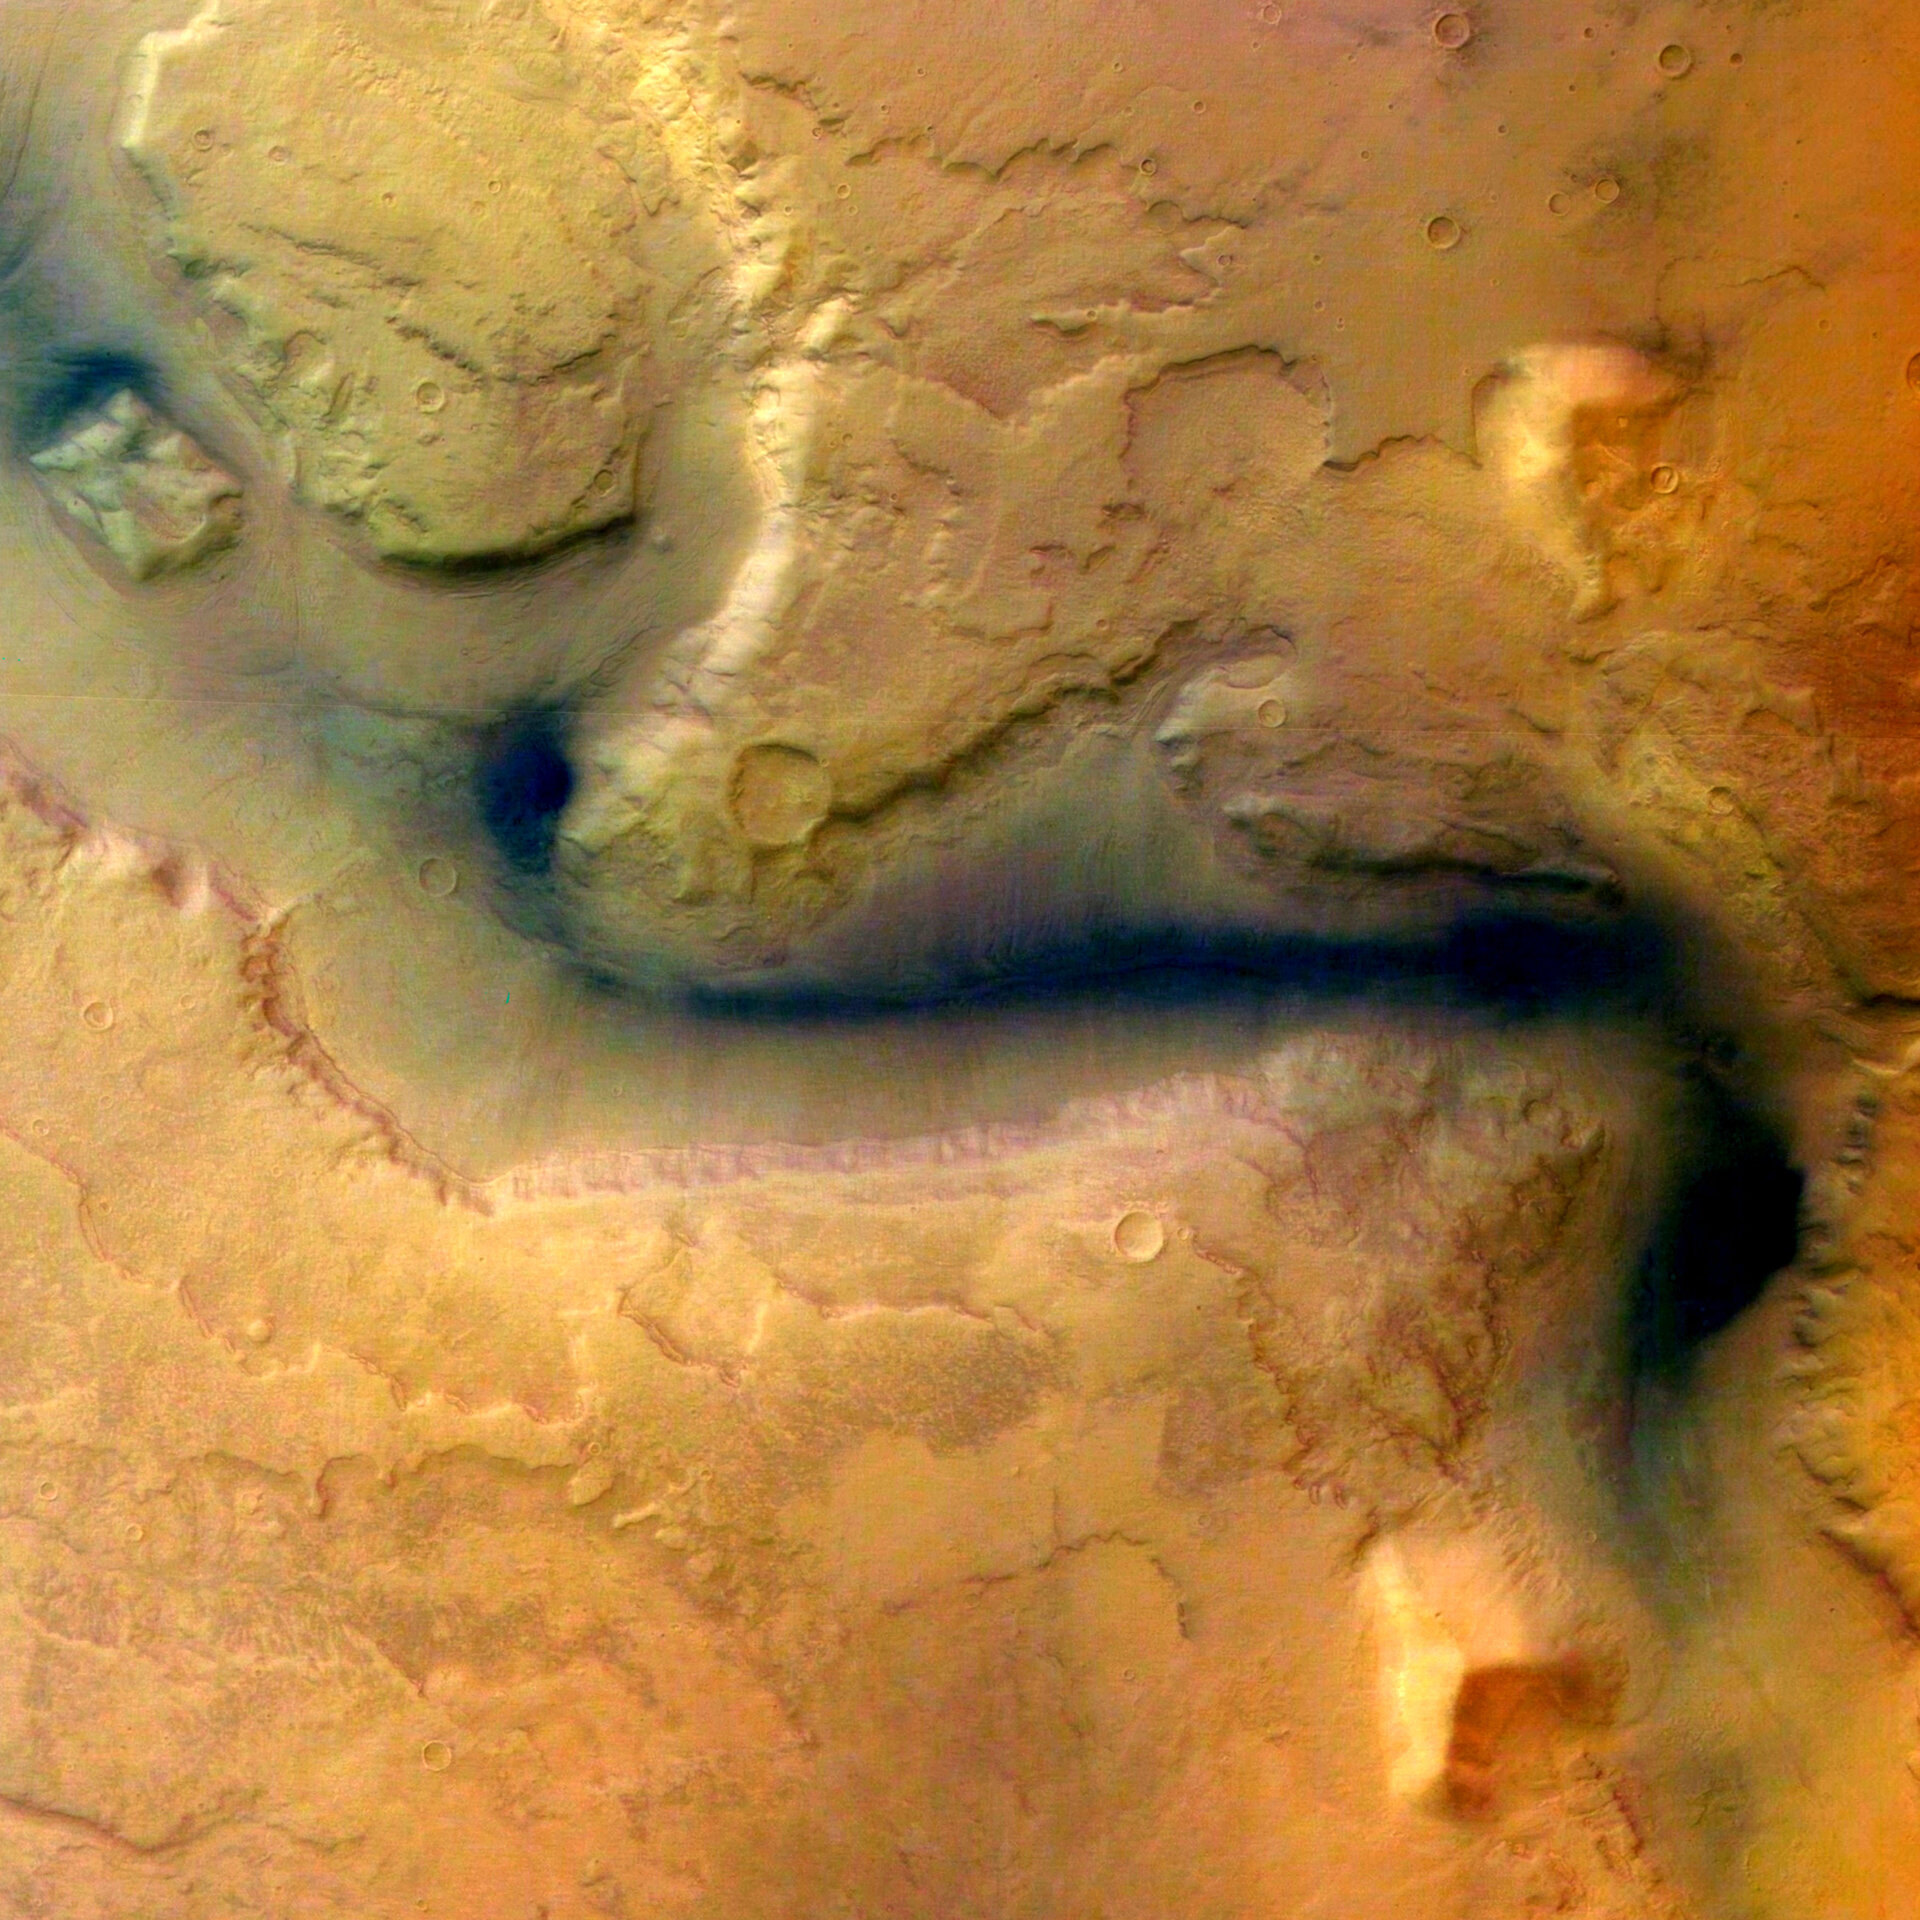 The Reull Vallis channel on Mars as seen by ESA's Mars Express in 2004